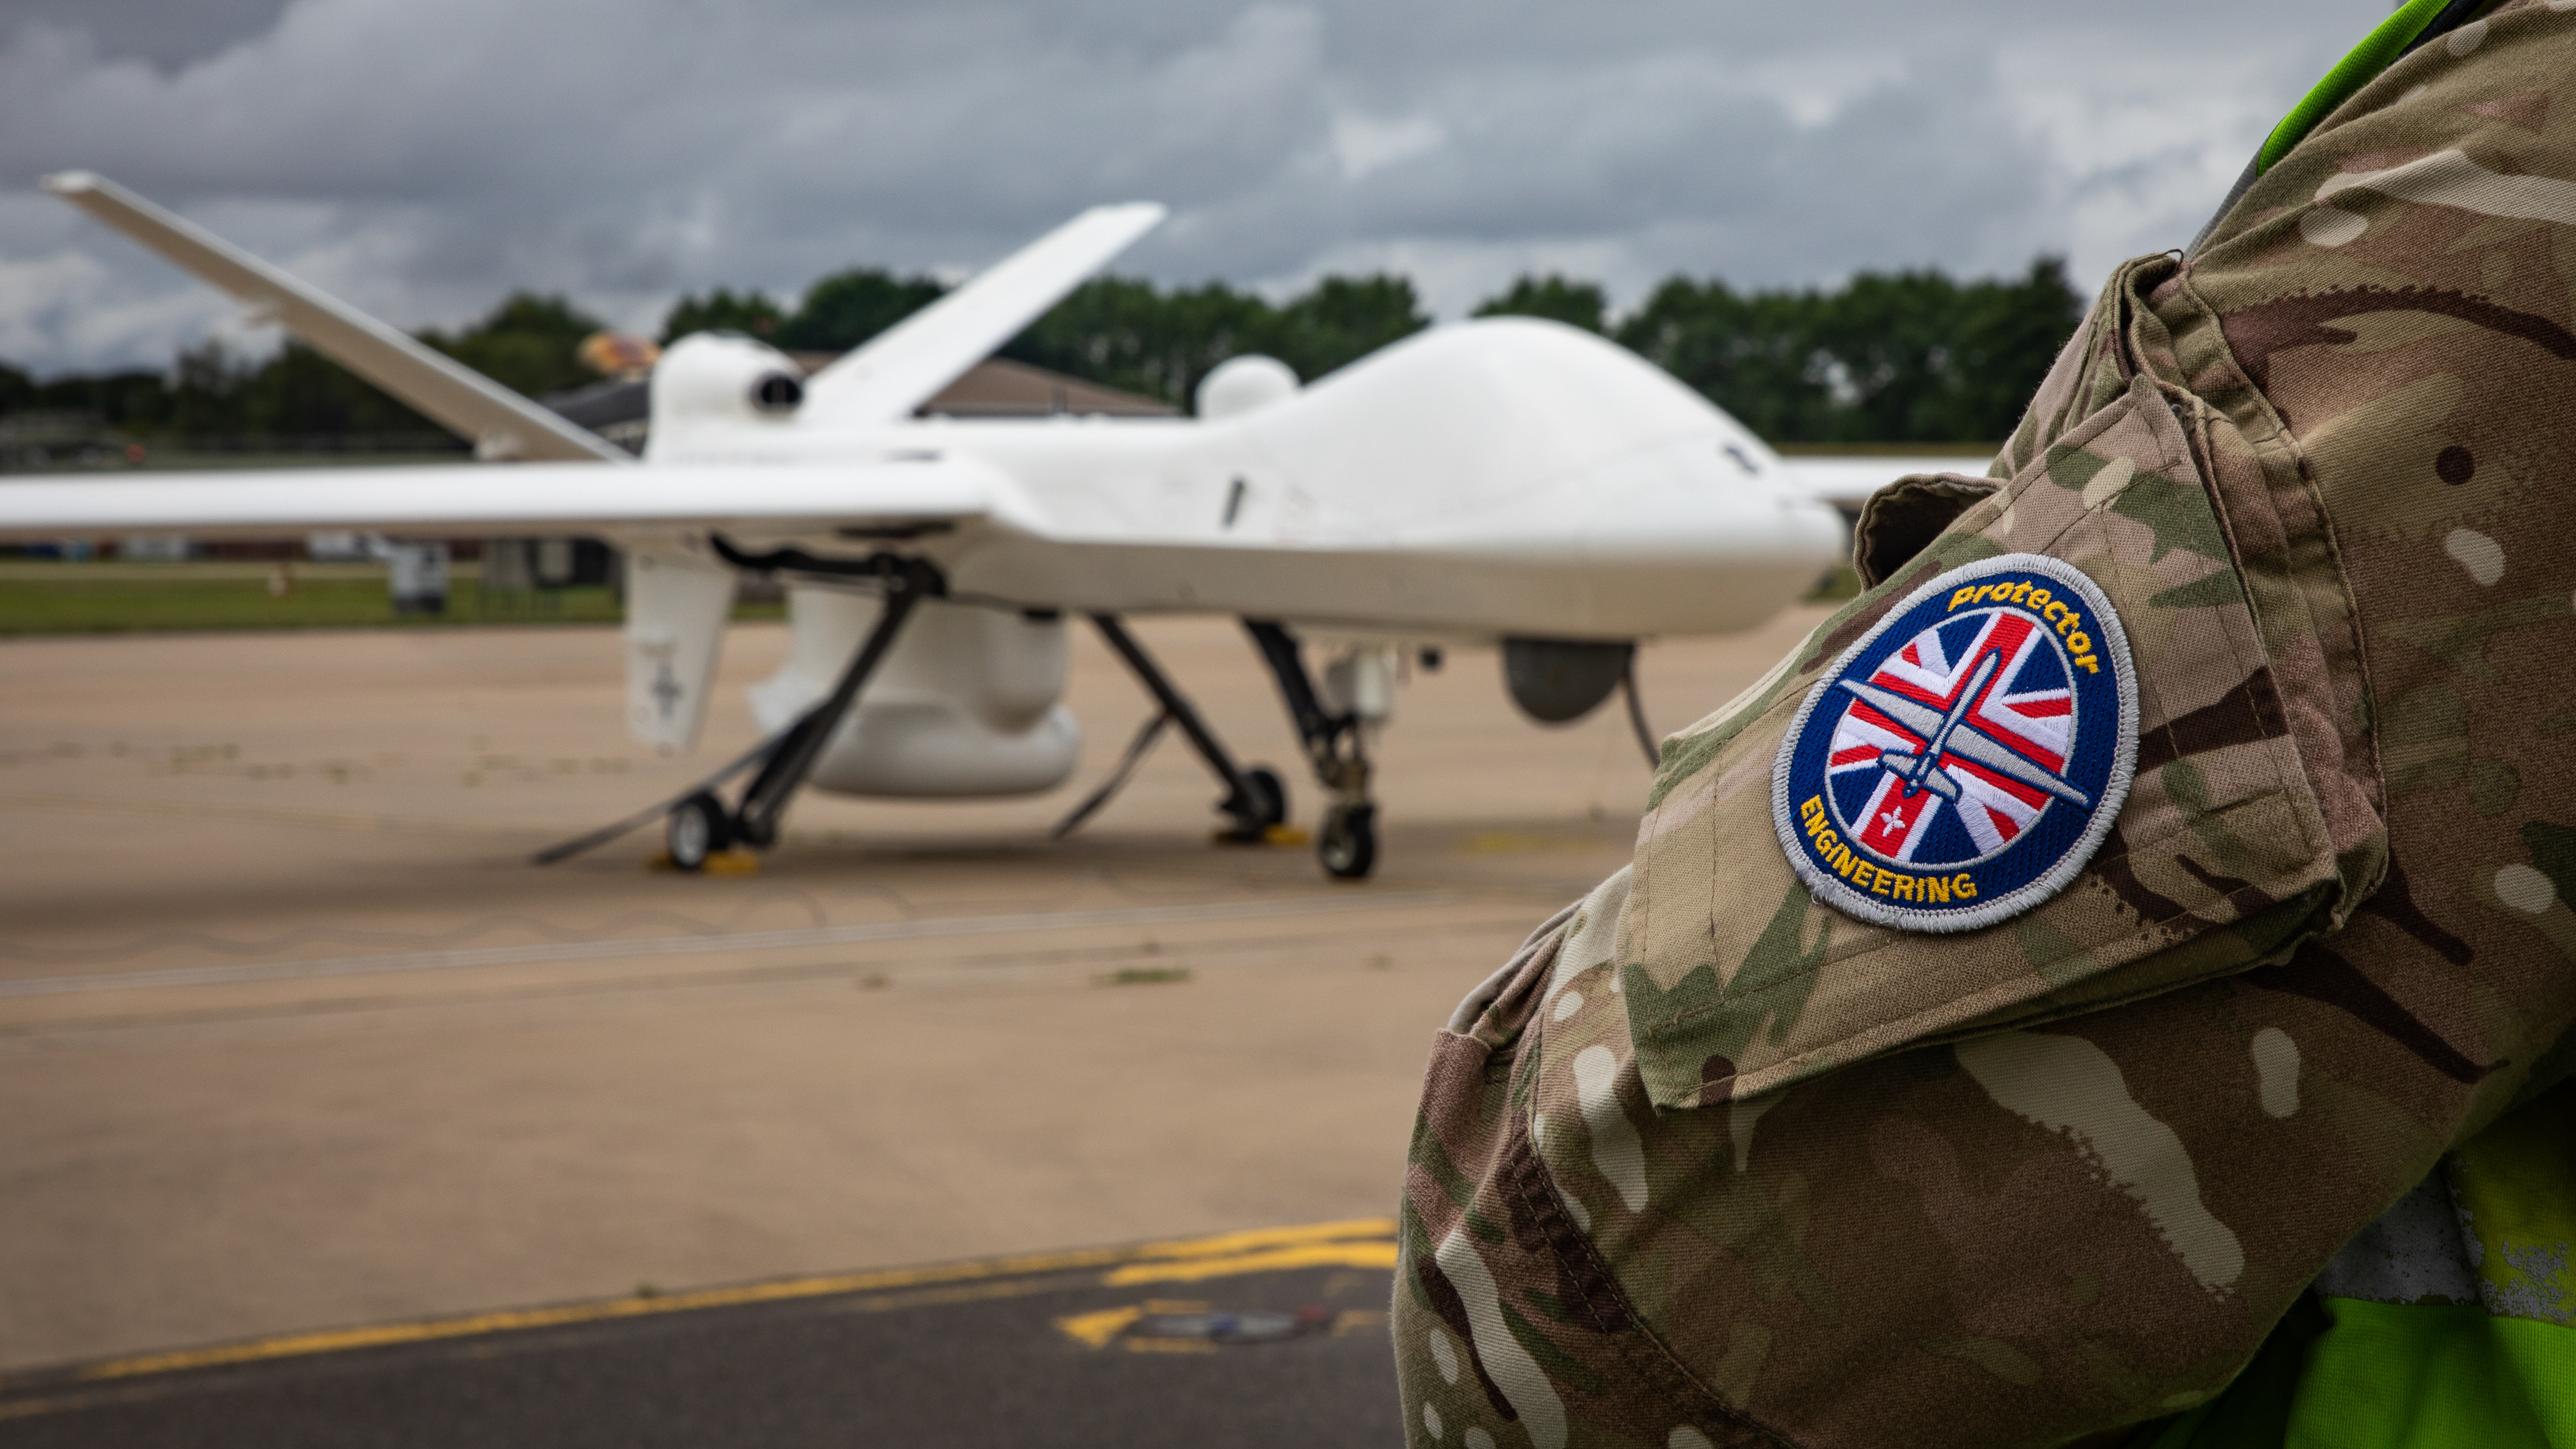 Image shows Protector aircraft on the airfield, with RAF aviator arm patch in shot. 